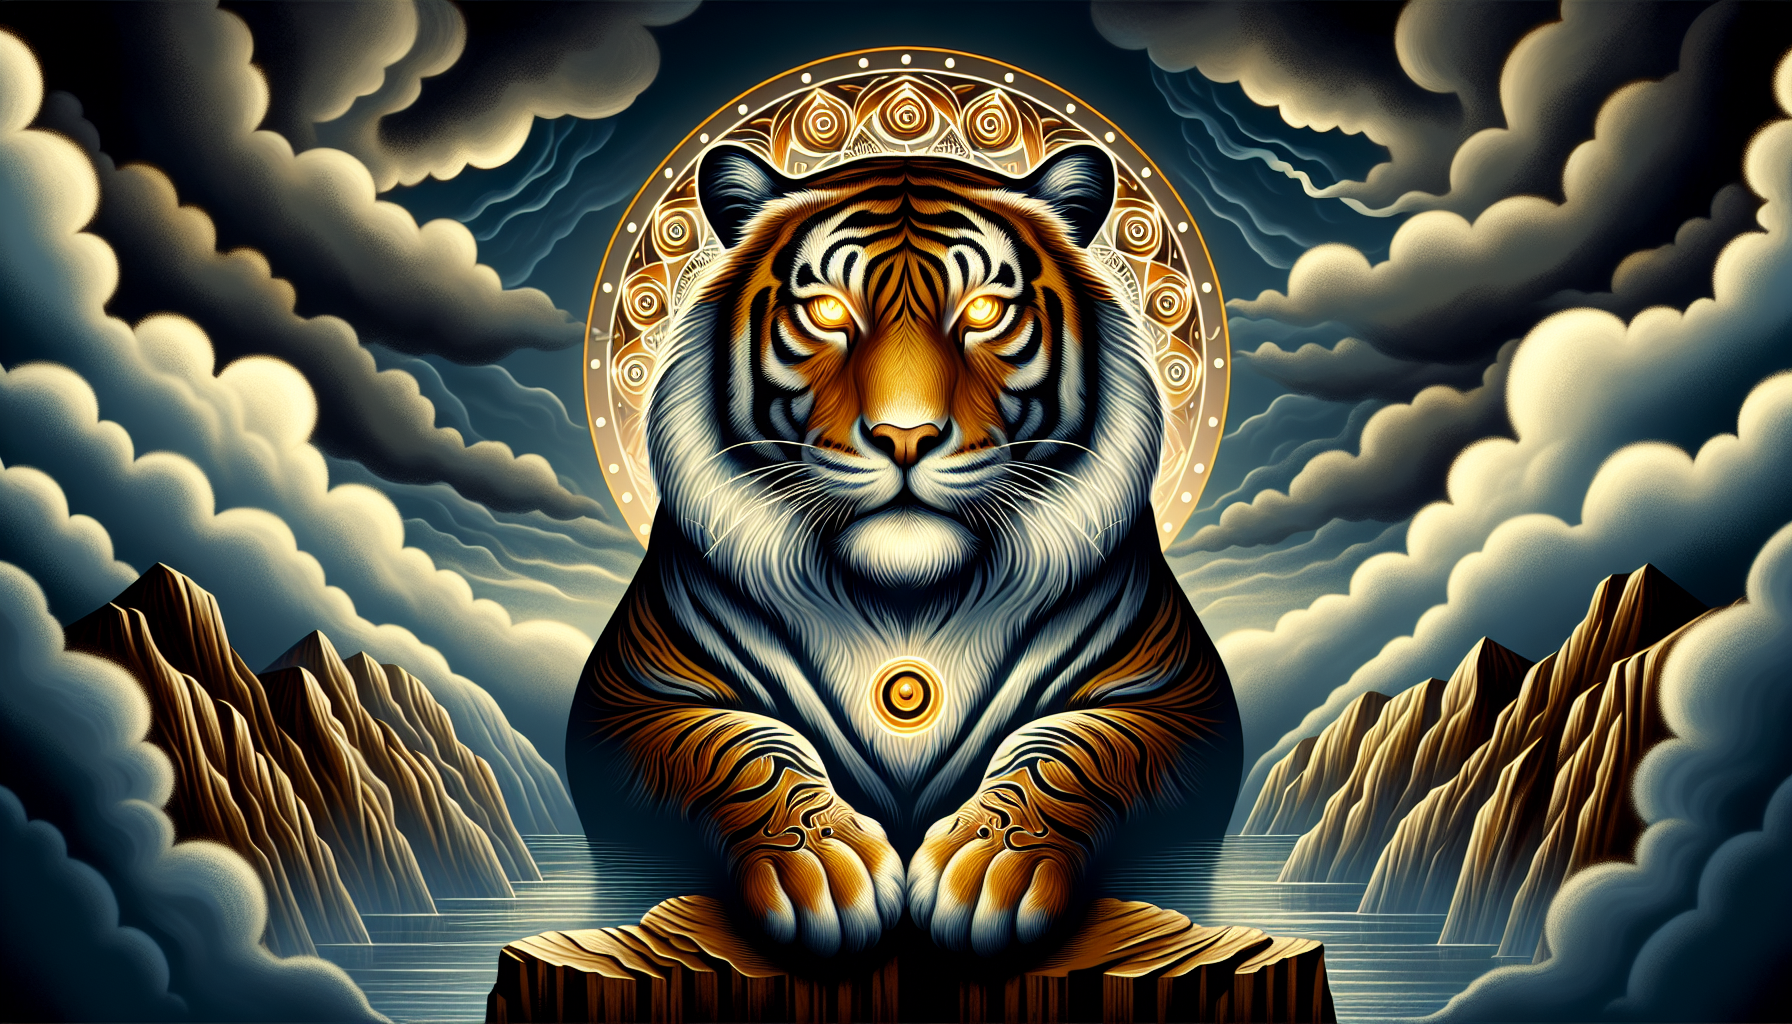 Symbolism of Tiger's Eye for courage and strength